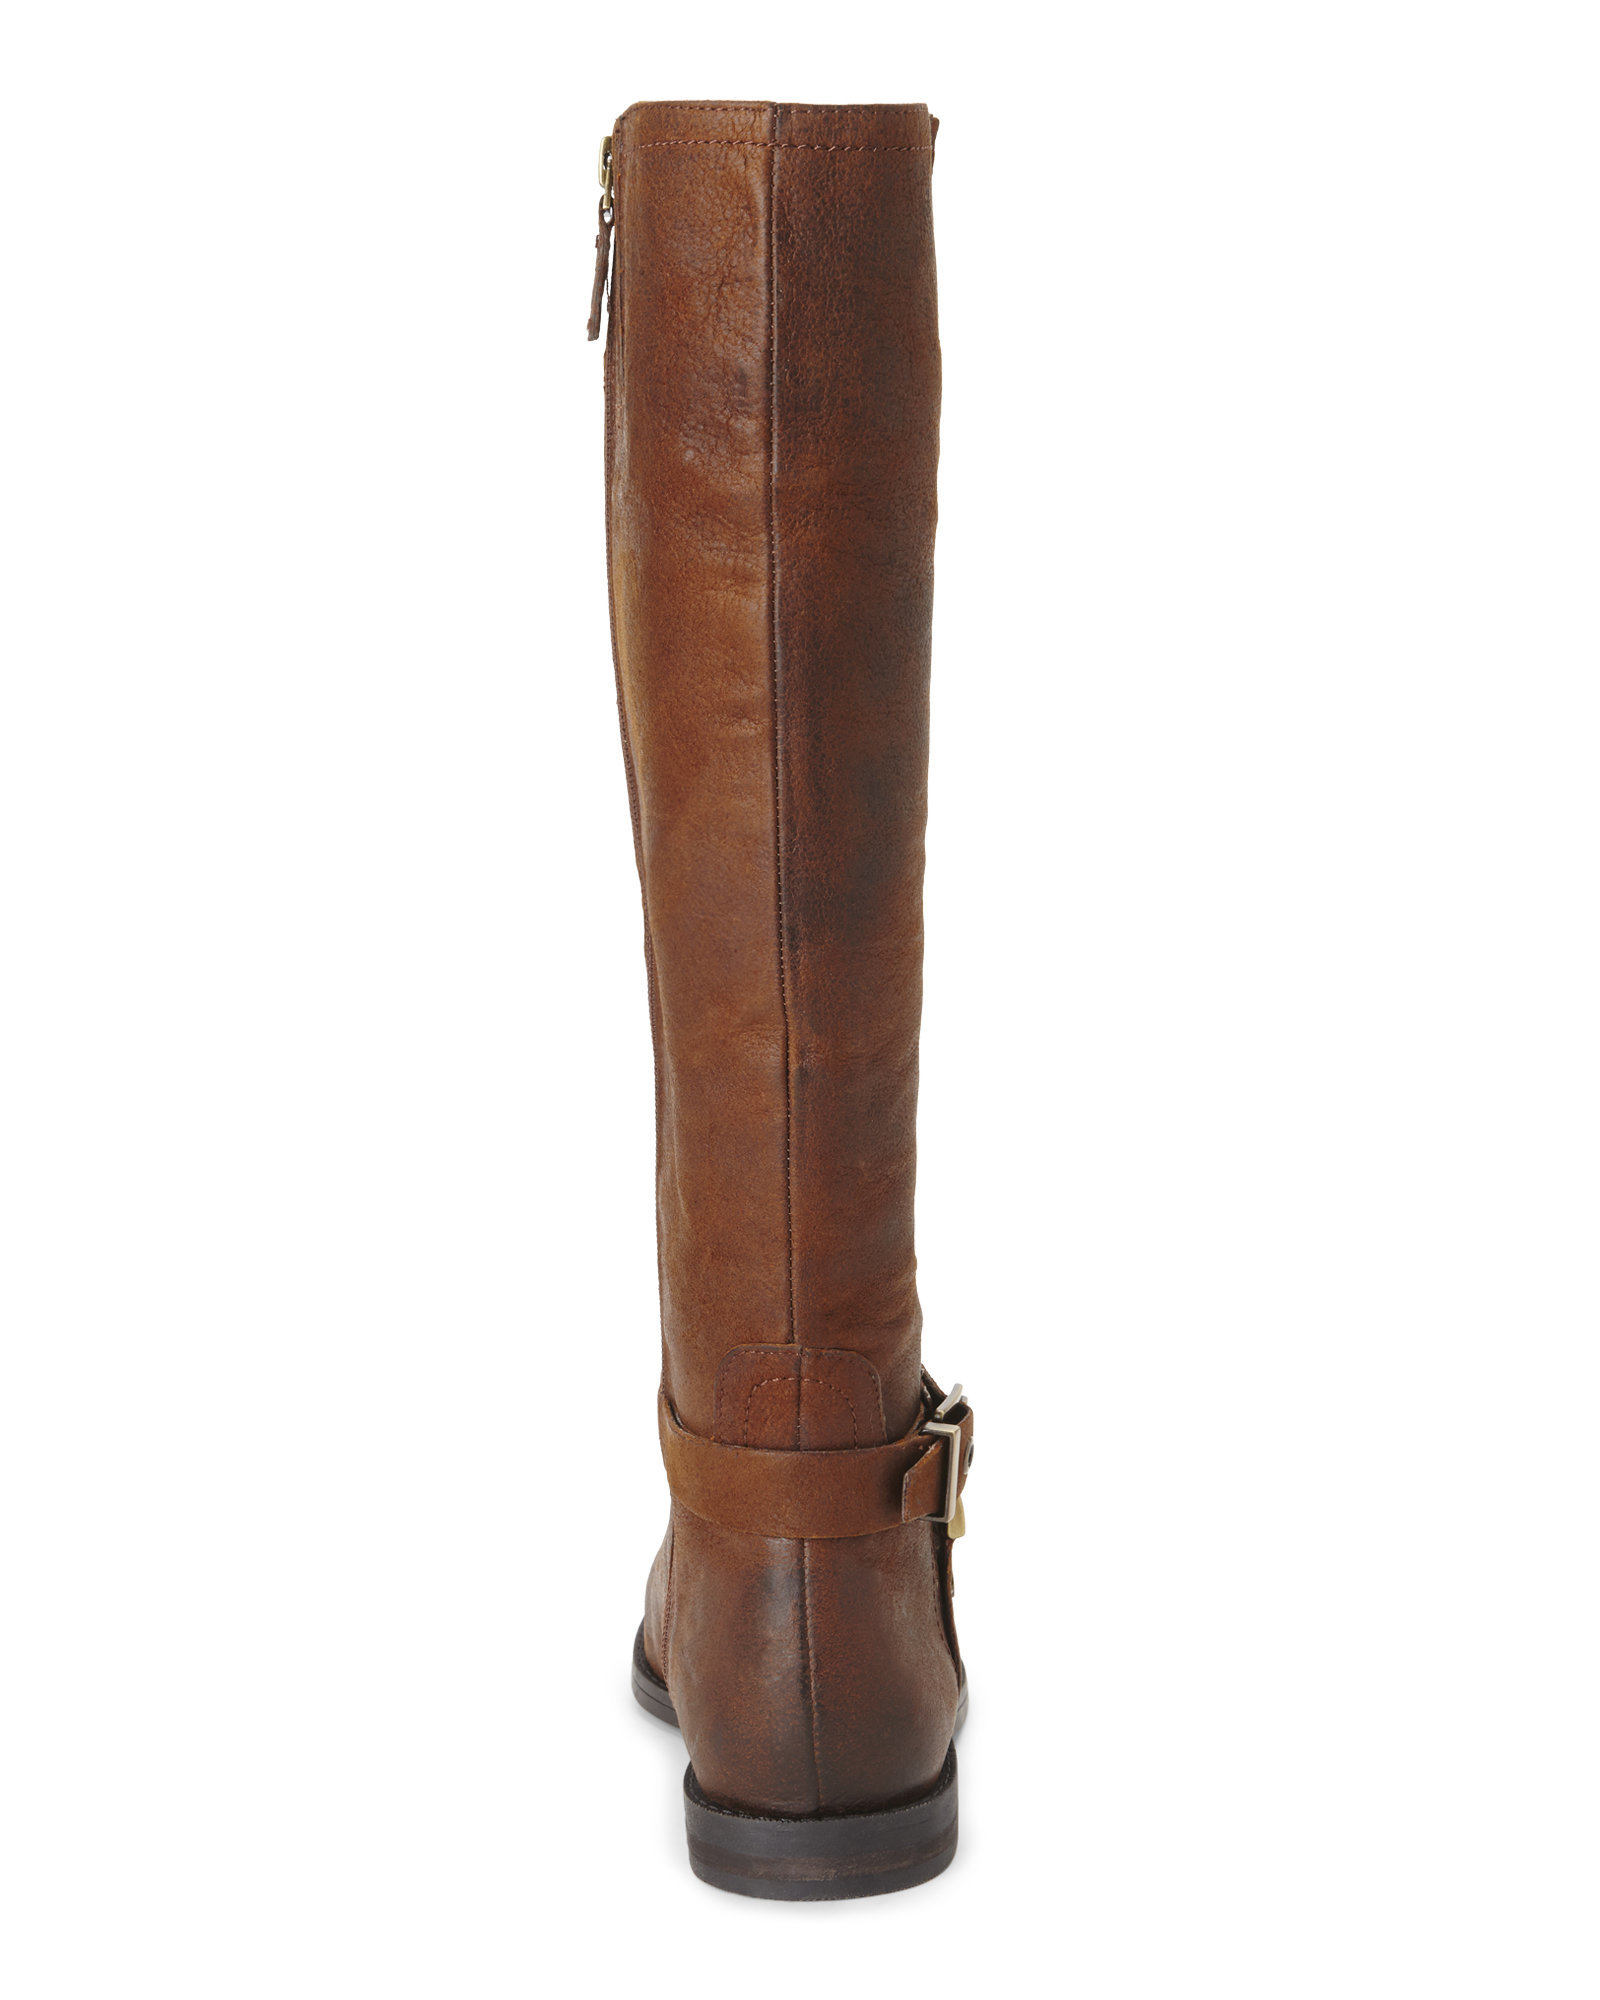 Lyst - Franco Sarto Vantage Leather Knee-High Boots in Brown